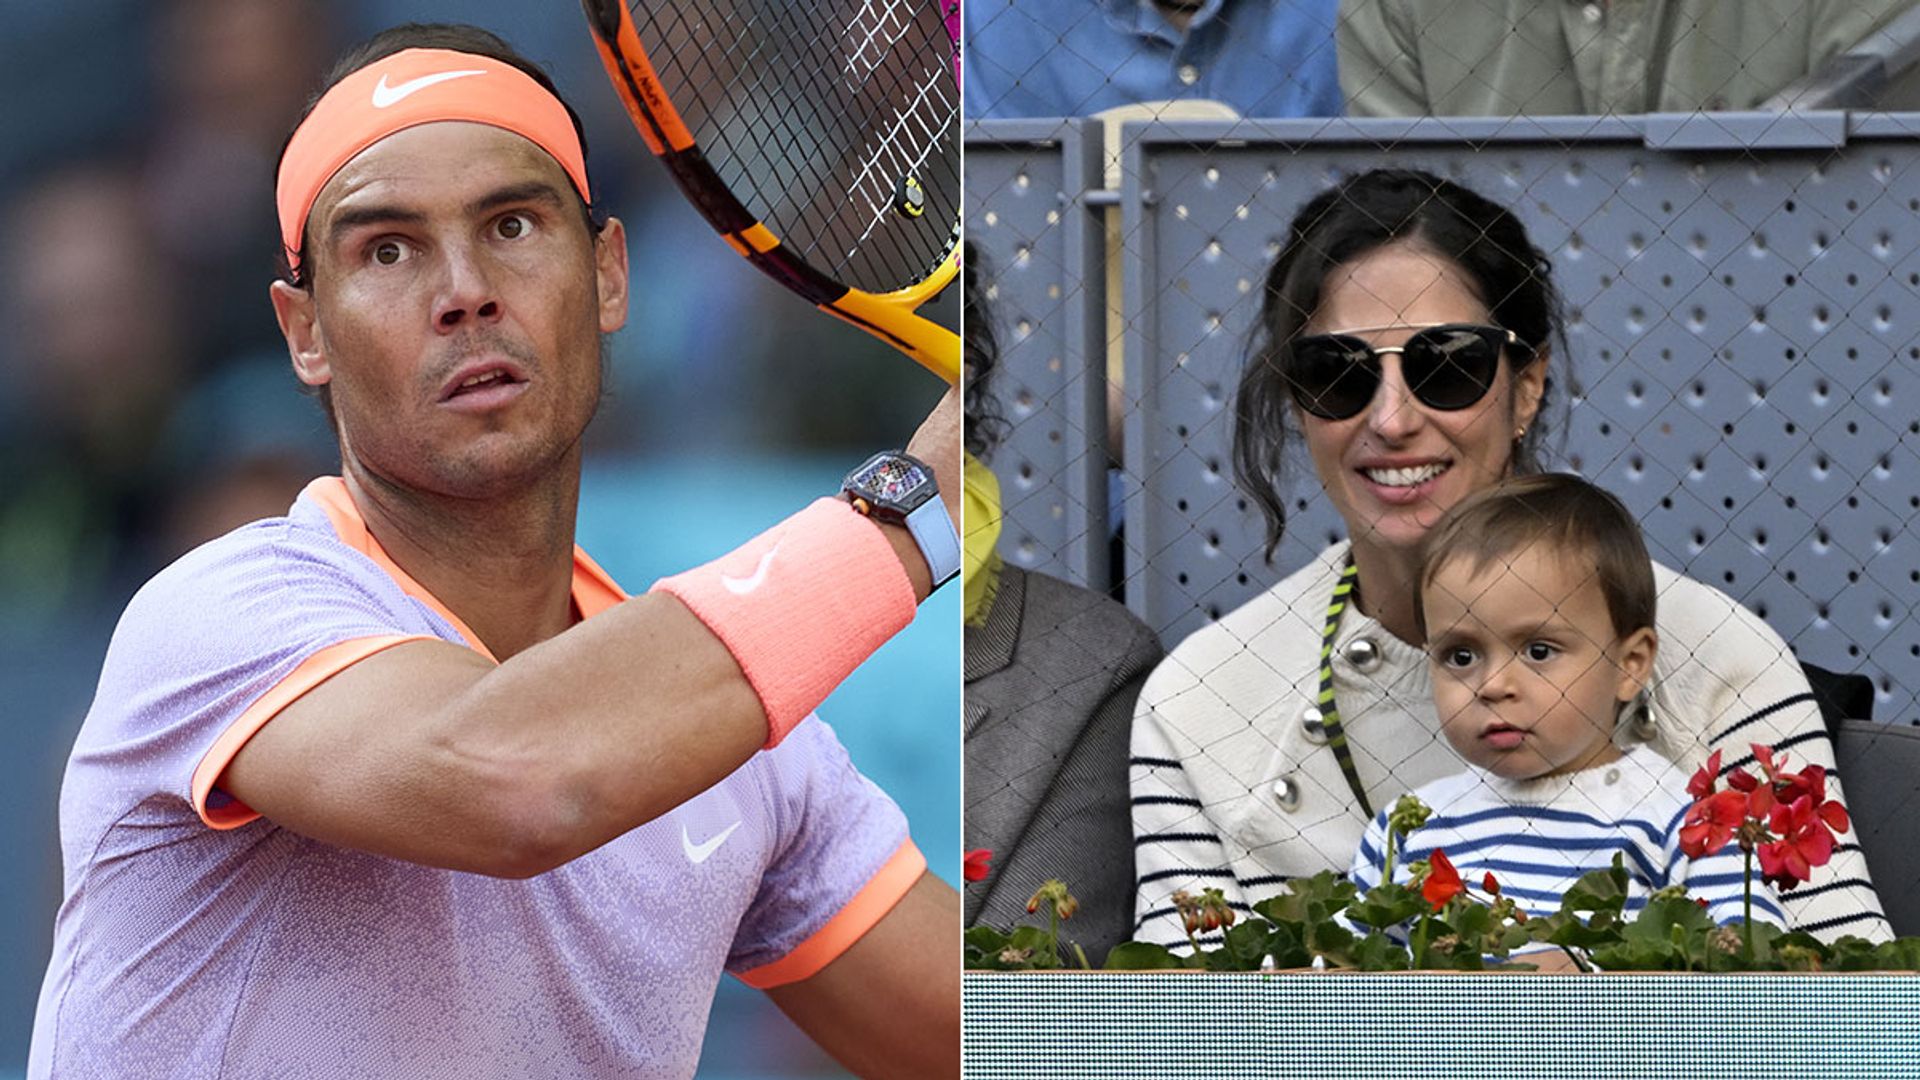 Rafael Nadal supported by wife Maria Francisca Perello and rarely-seen baby son in sweet moment